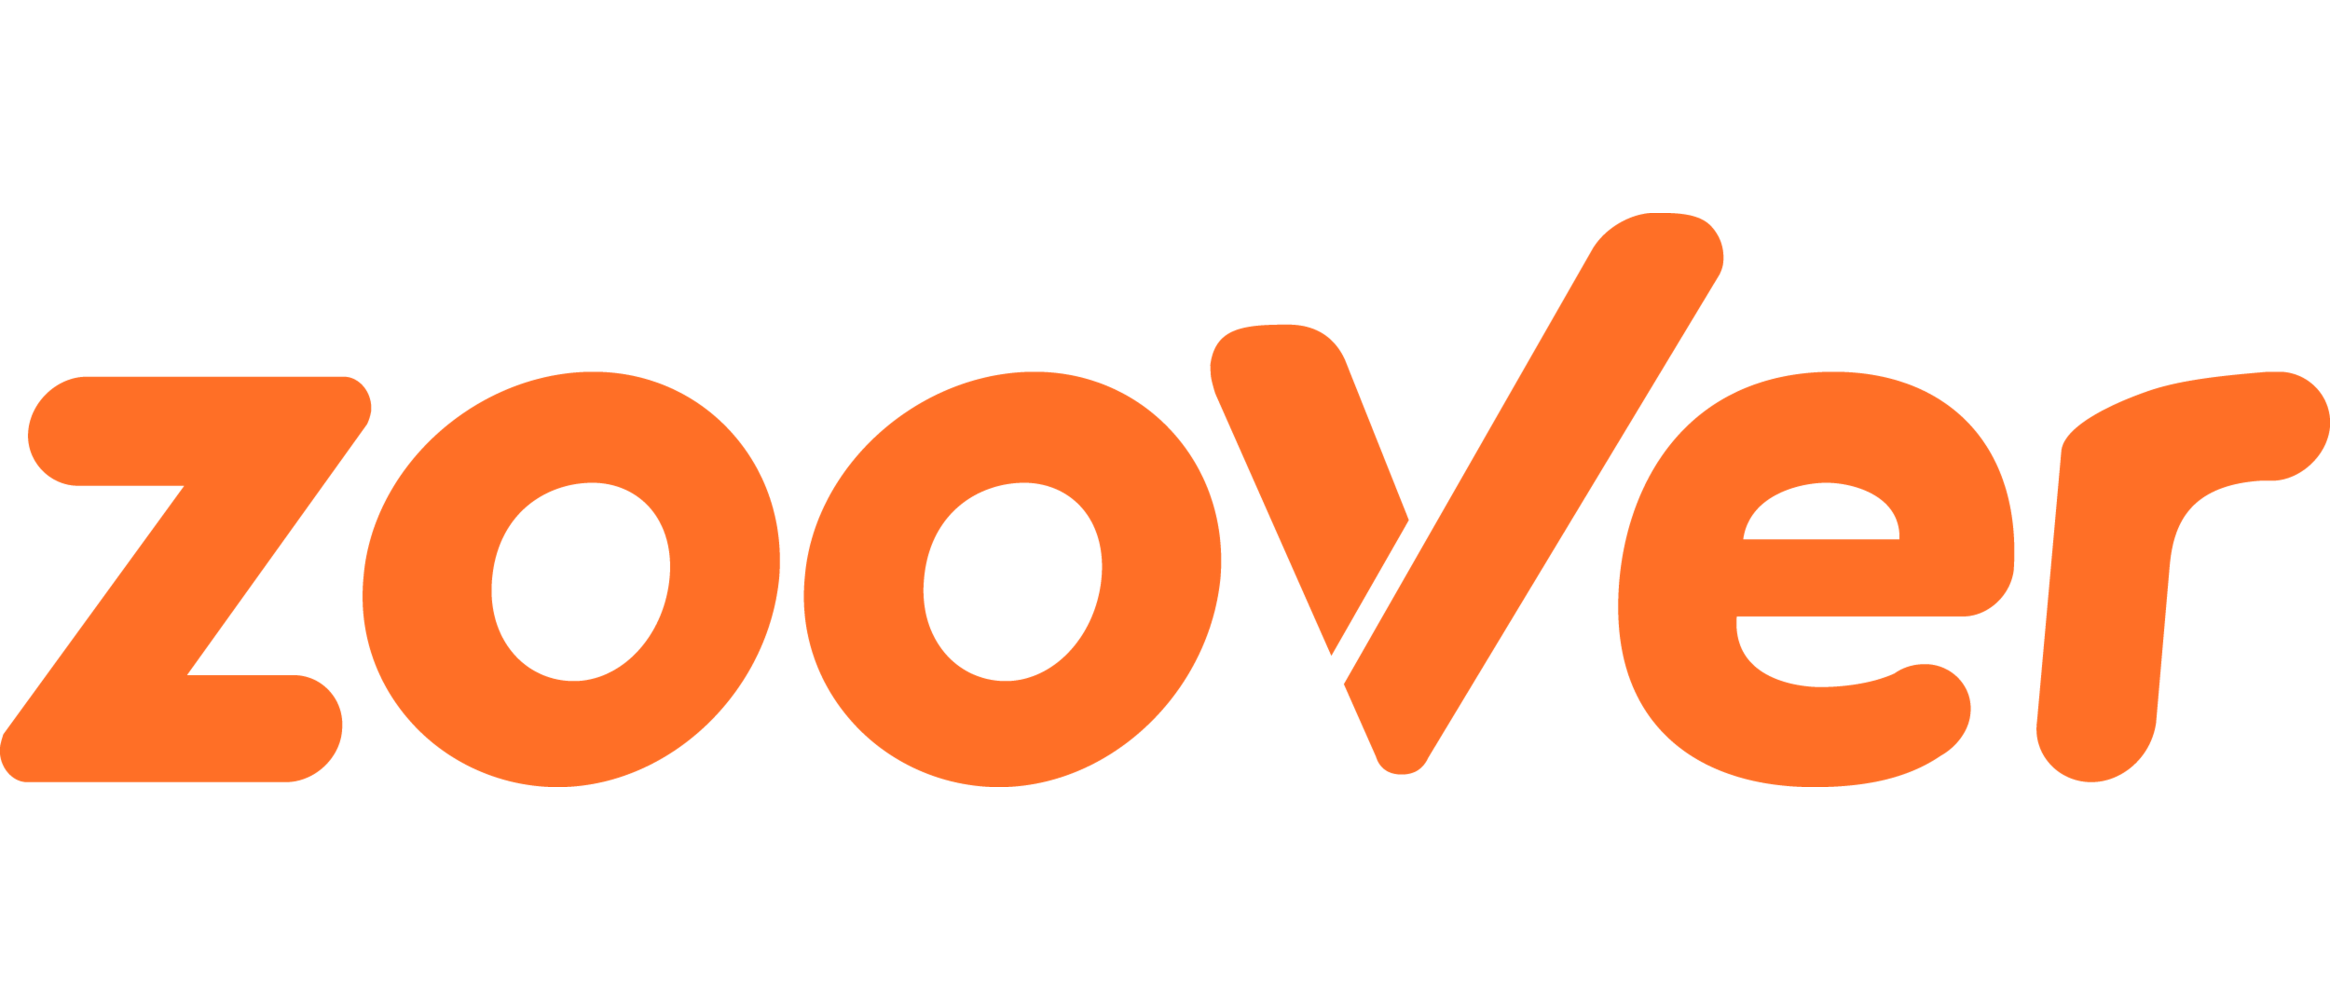 Zoover.nl